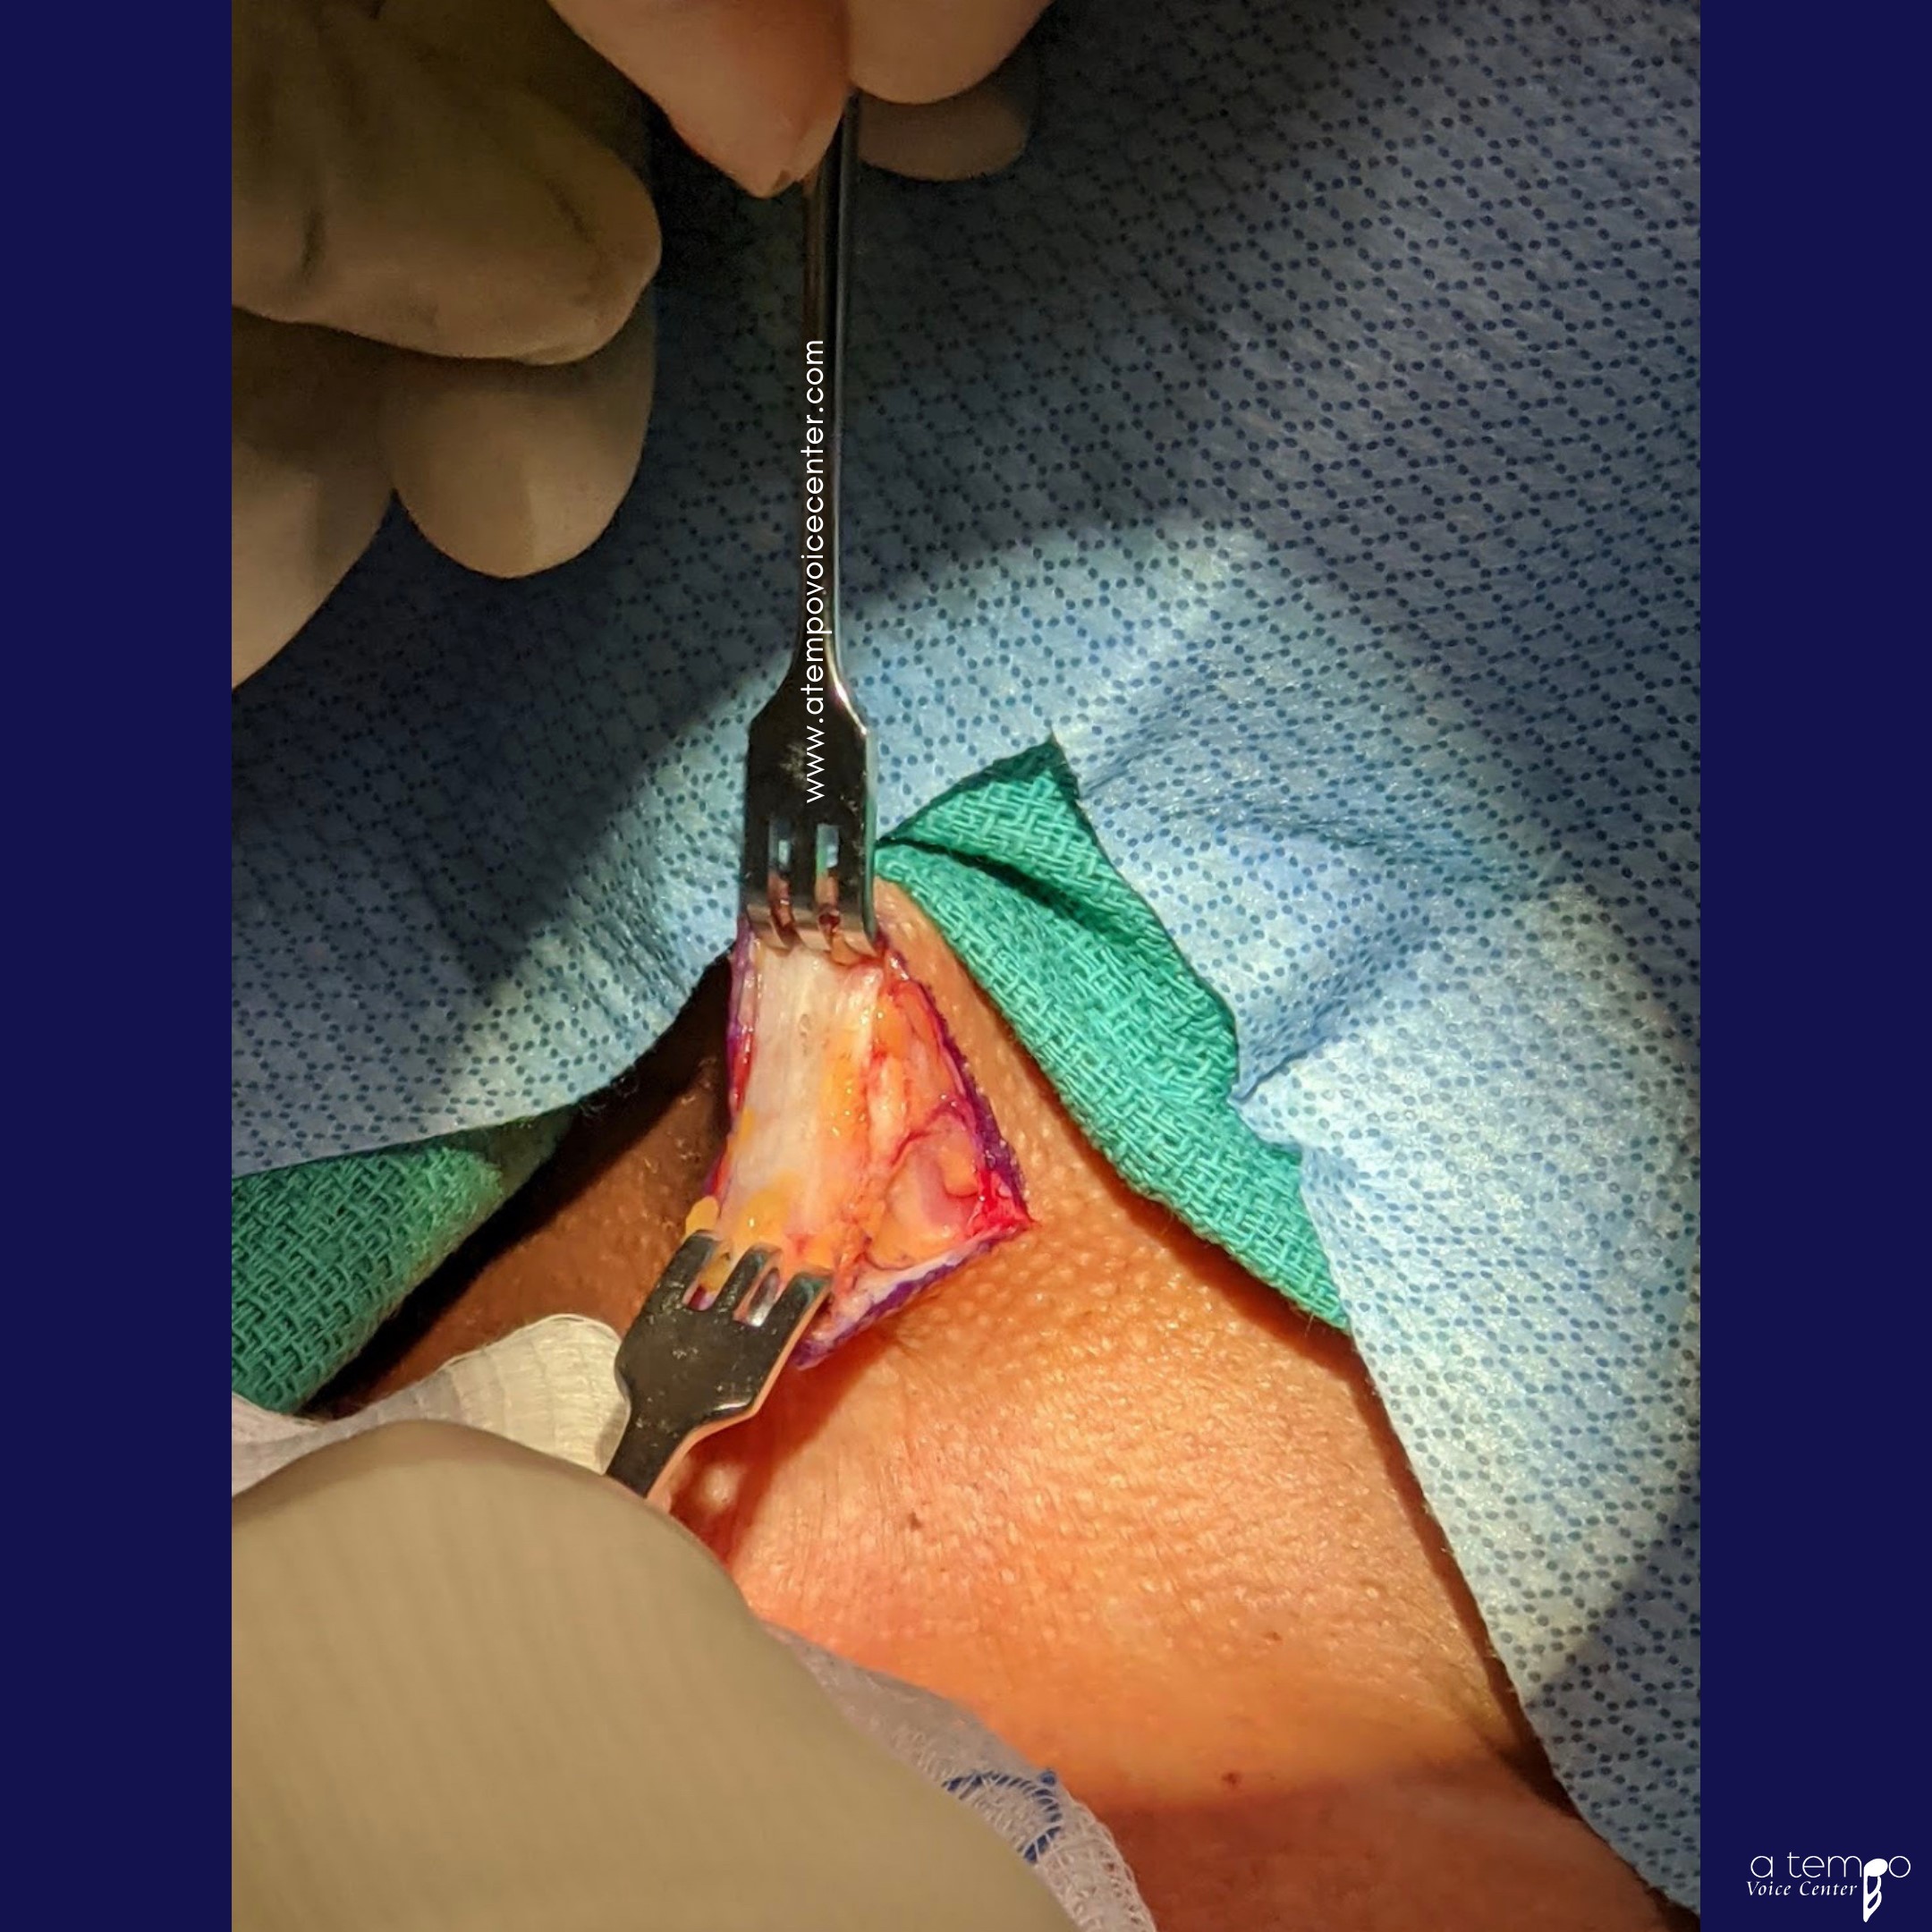 Next, an anterior incision was made across the neck and the tissue was pulled apart.